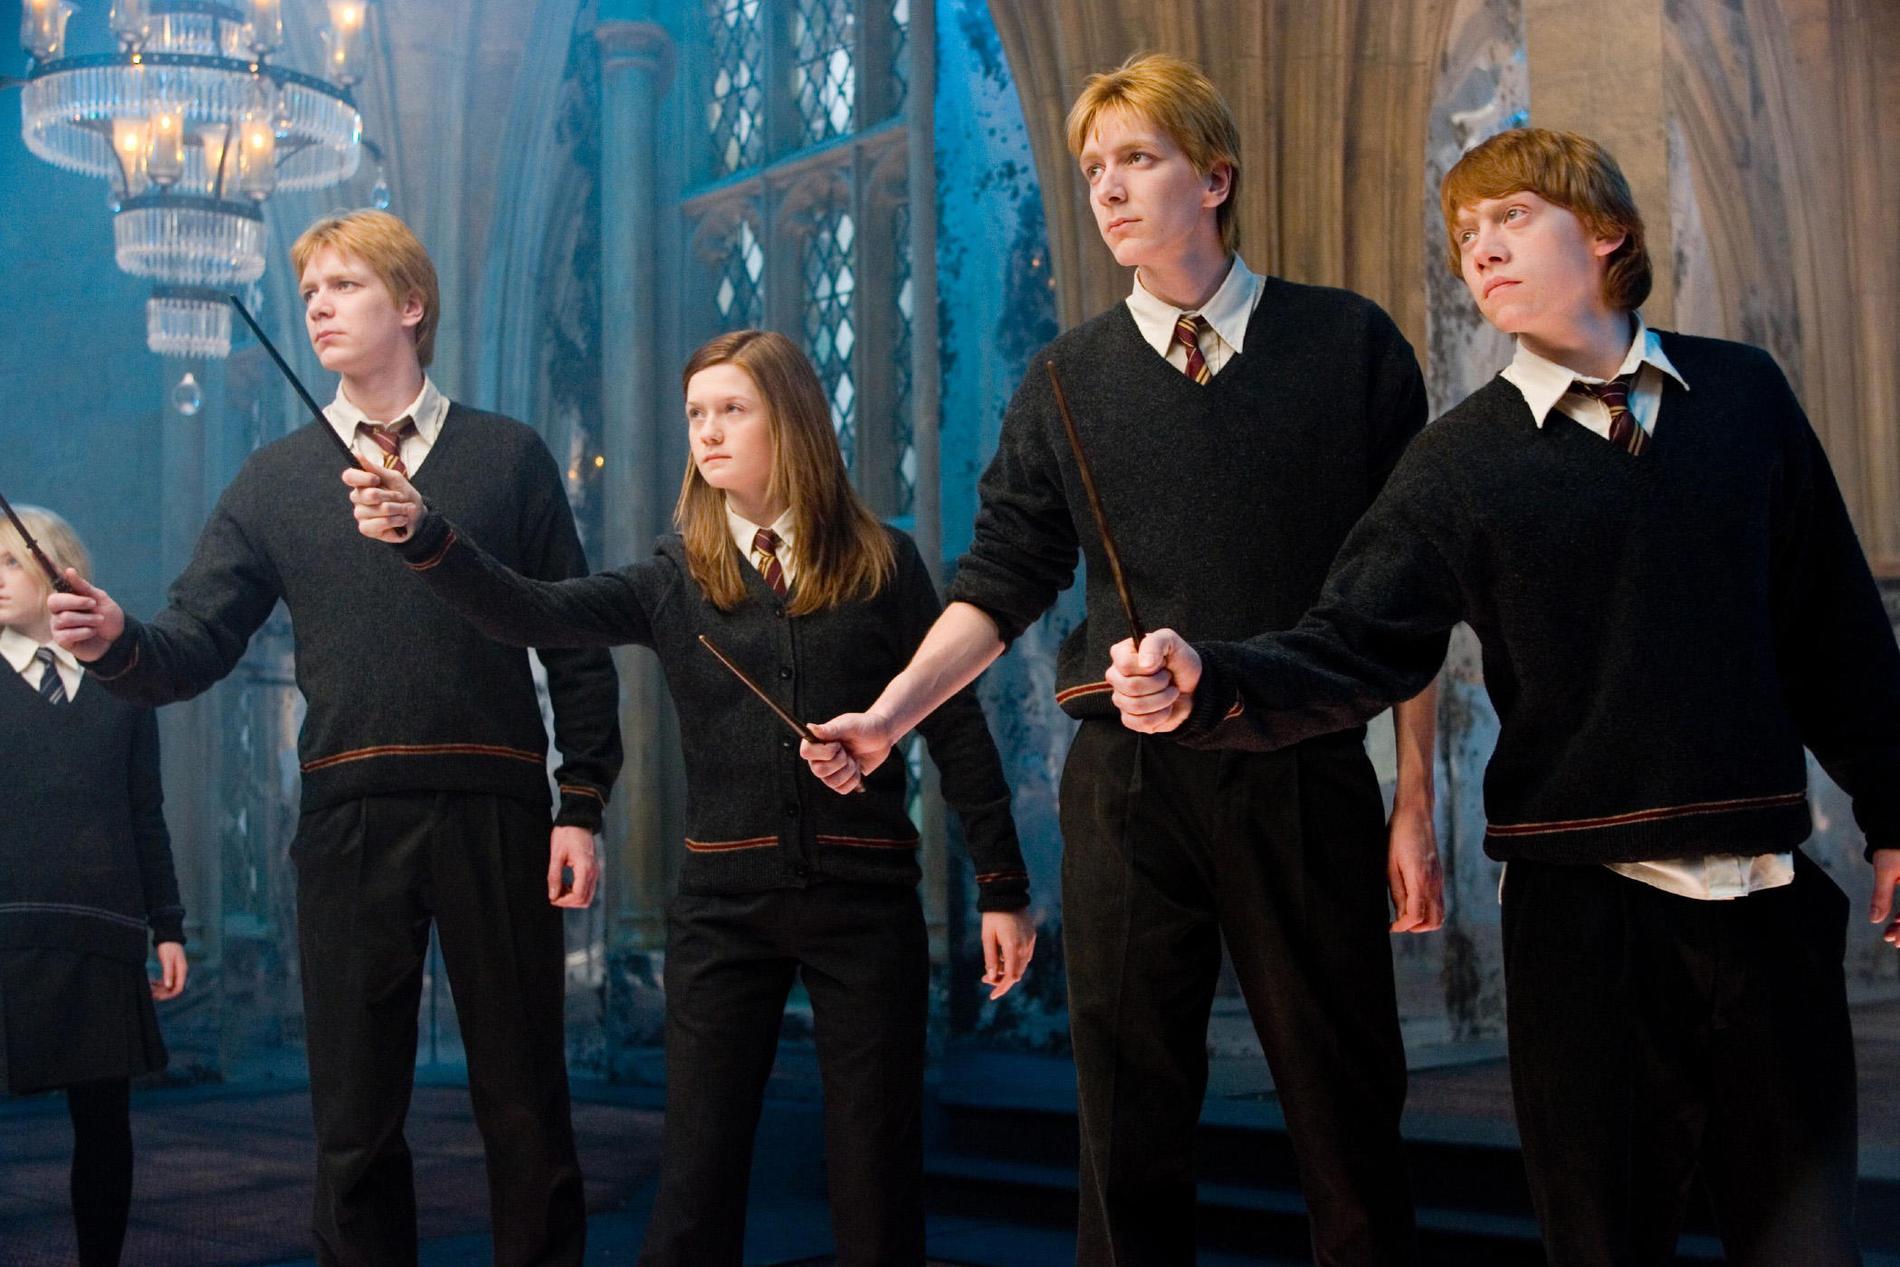 James Phelps, Bonnie Wright, Rupert Grint, Oliver Phelps i ”Harry Potter and the Order of the Phoenix”.                                                                                                                                                                                                                                                                                                                                                             